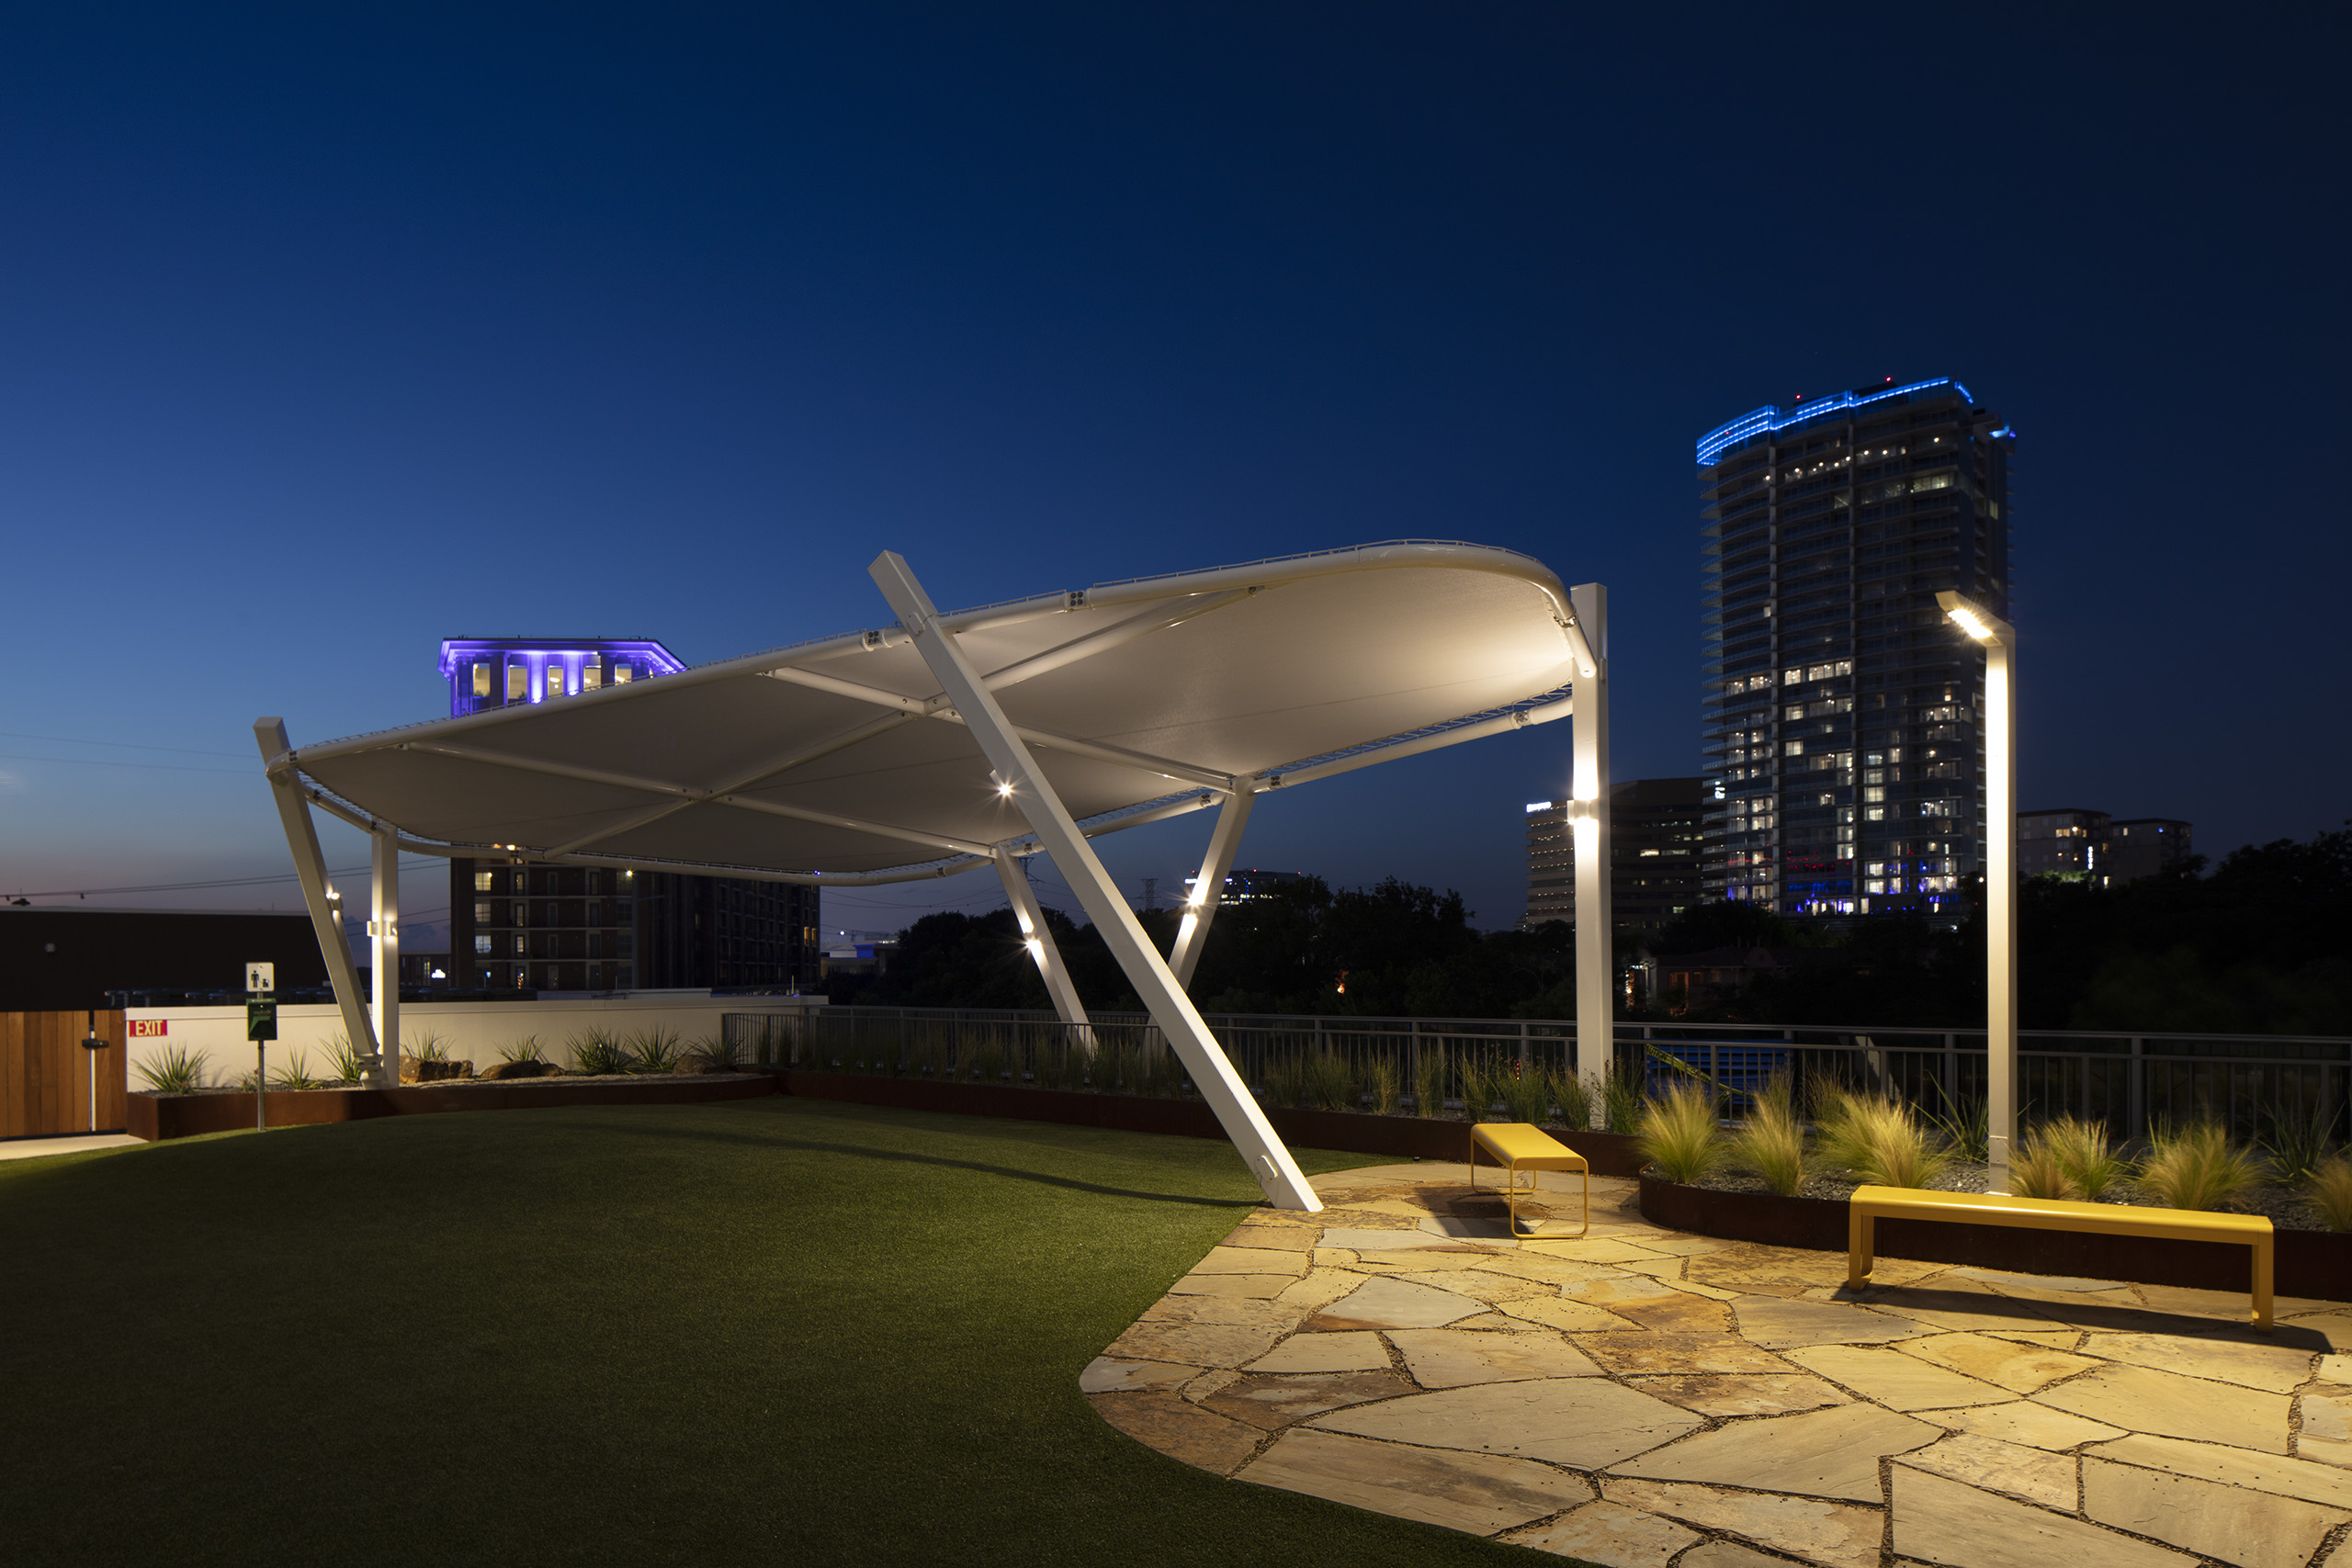 Dog park shade structure lights up the night